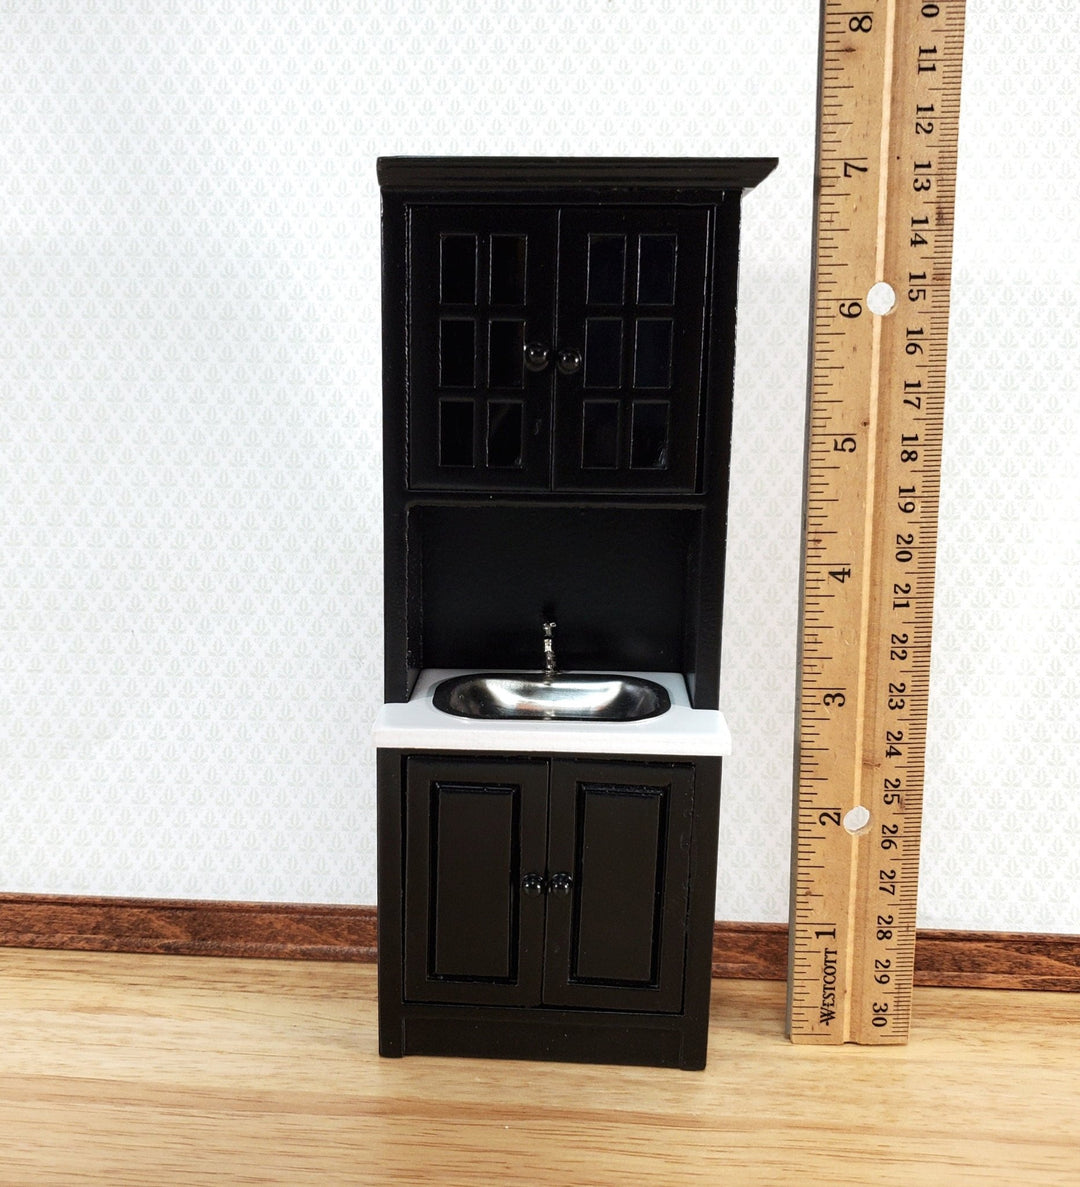 Dollhouse Miniature Kitchen Cabinet Tall with Sink 1:12 Scale Furniture Black Finish - Miniature Crush